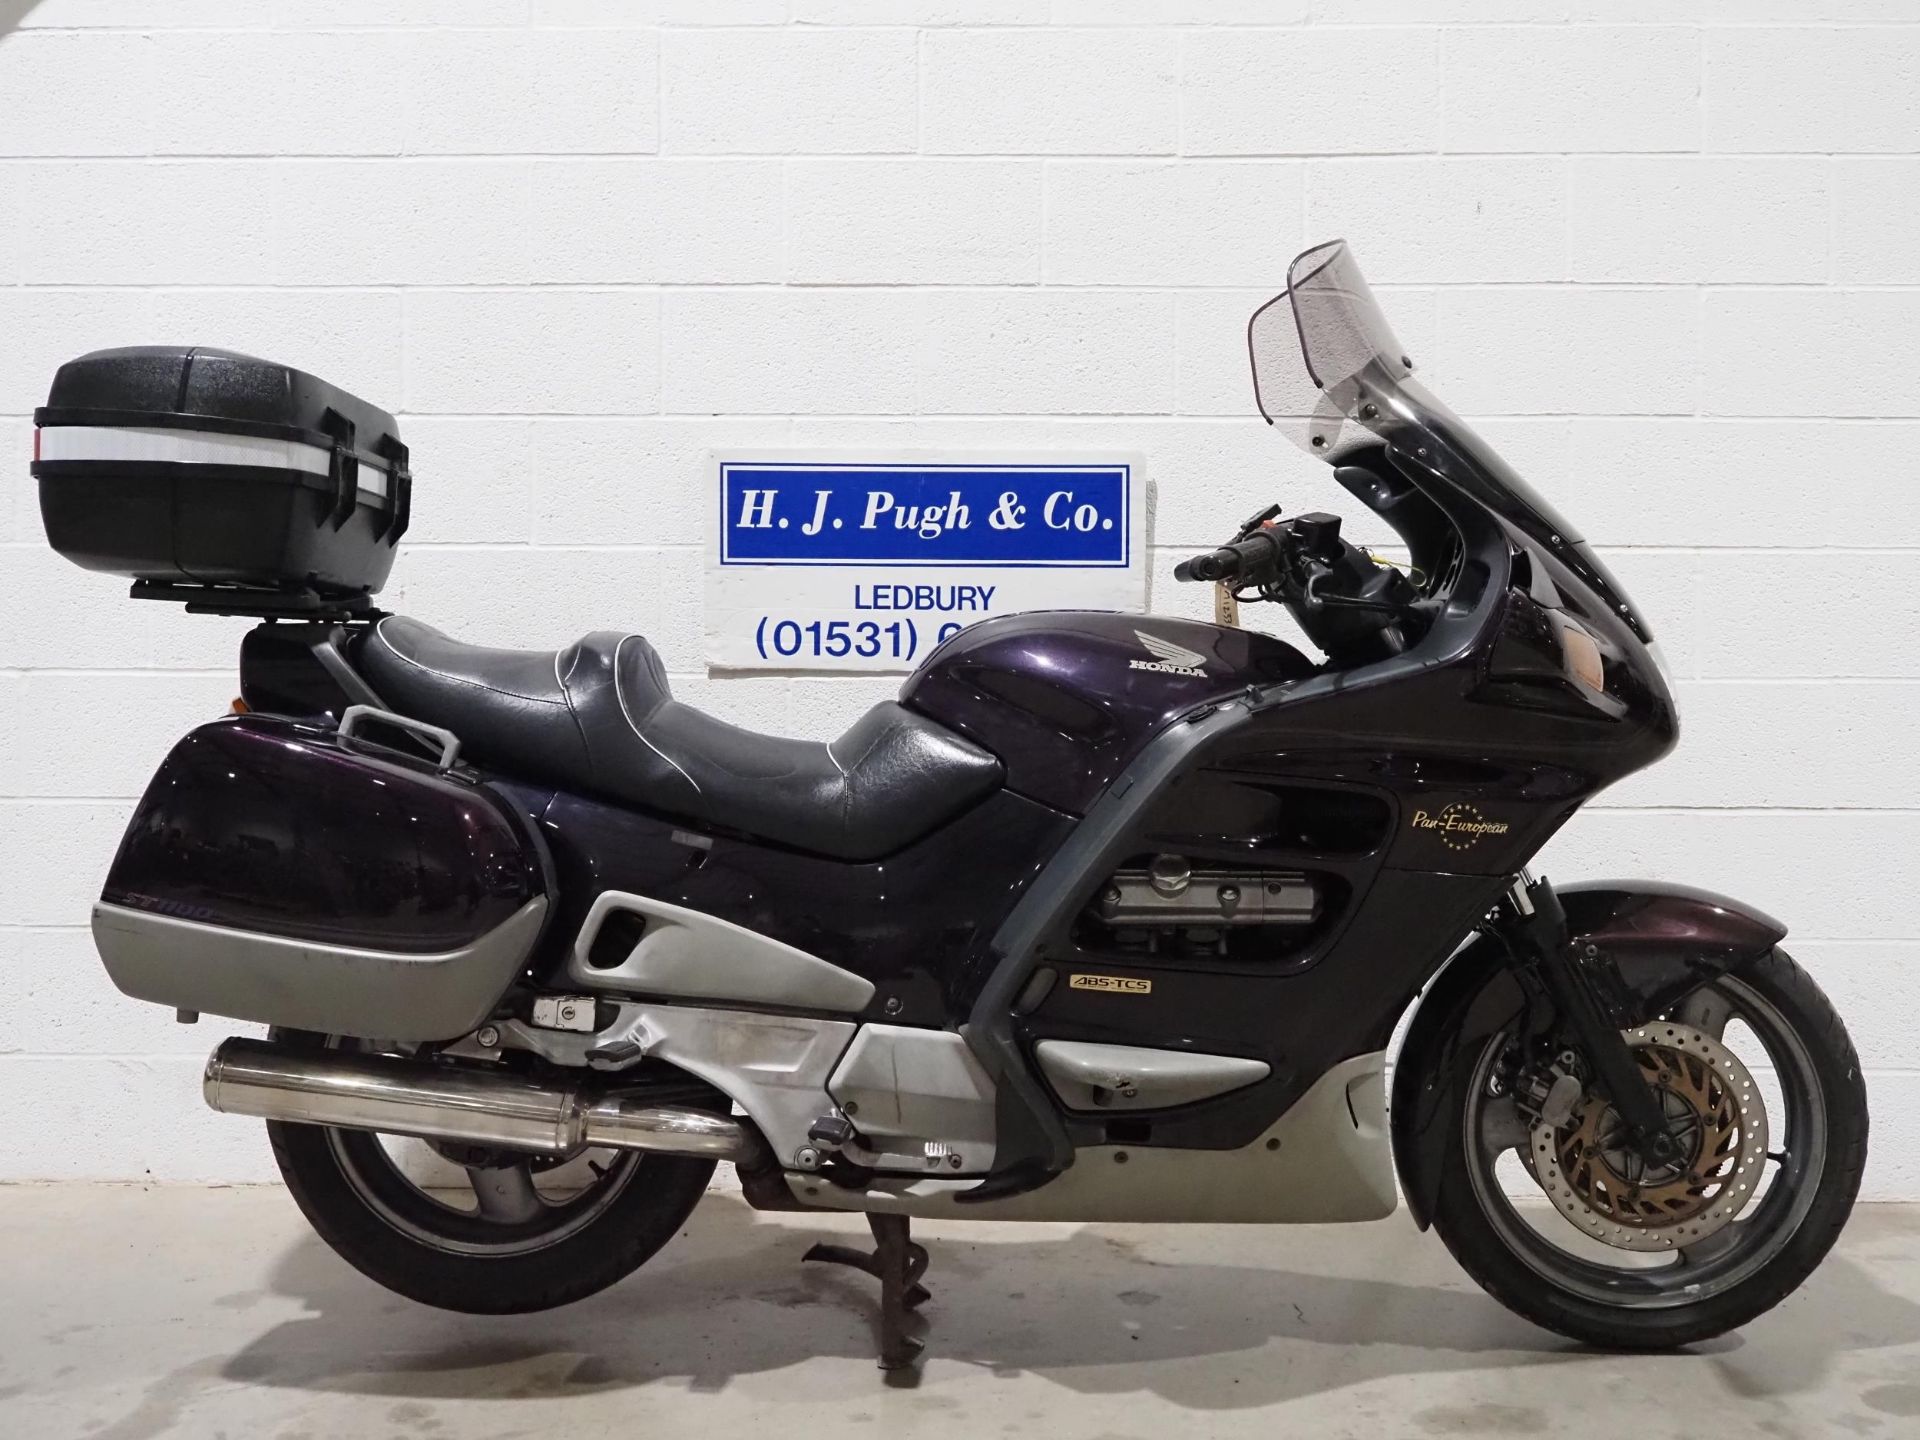 Honda ST1100 motorcycle. 1995. 1084cc. Runs and rides. MOT until 25.04.25 and comes with MOT test